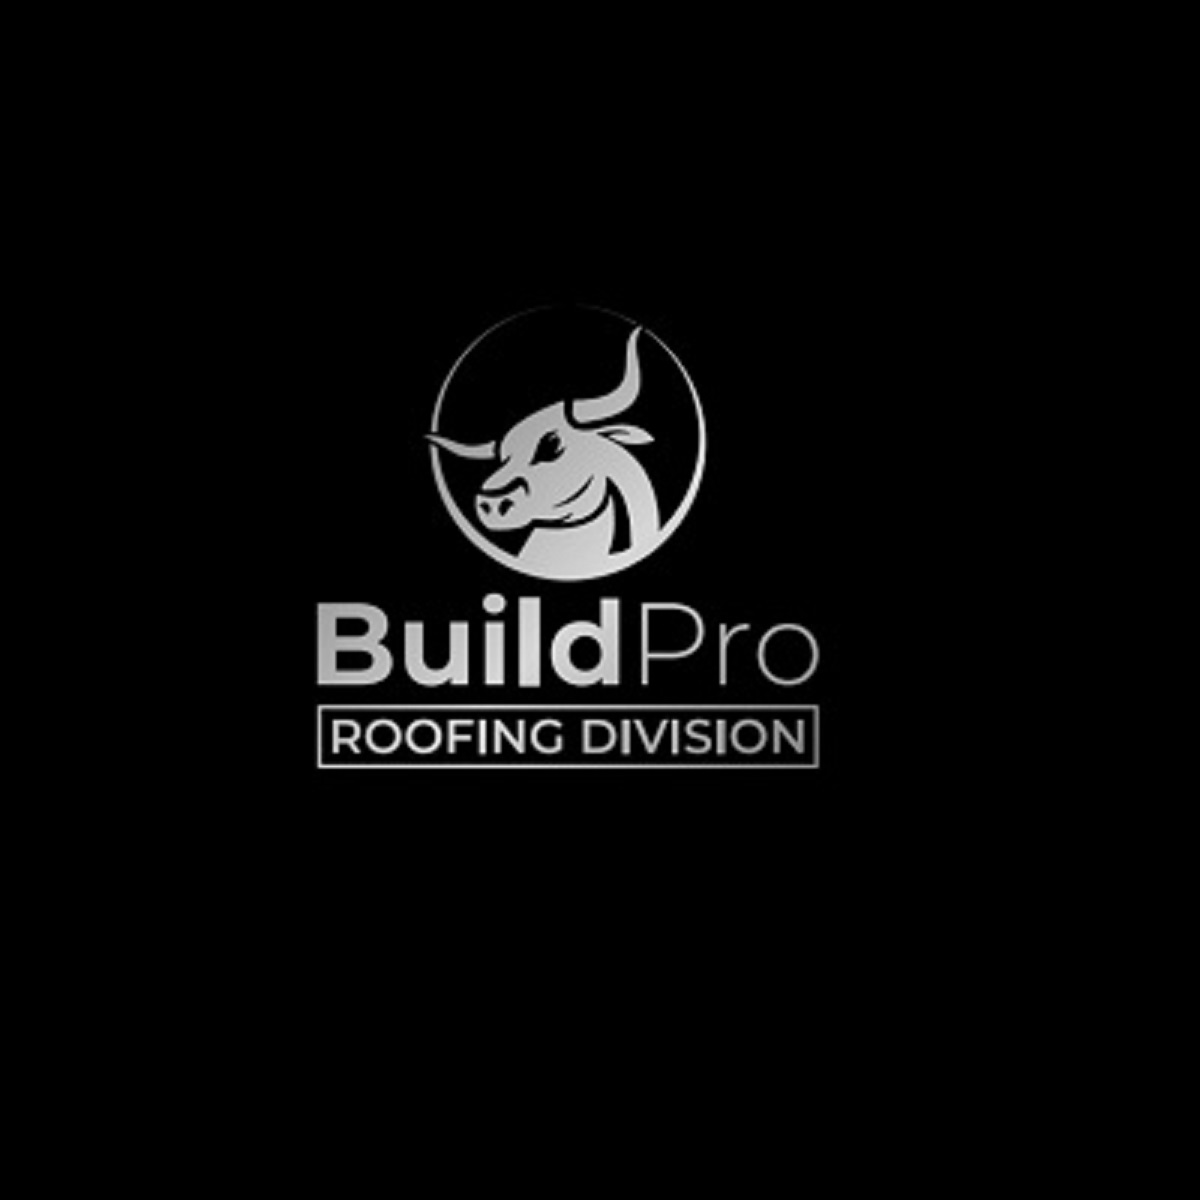 BuildPro Roofing Company Cover Image